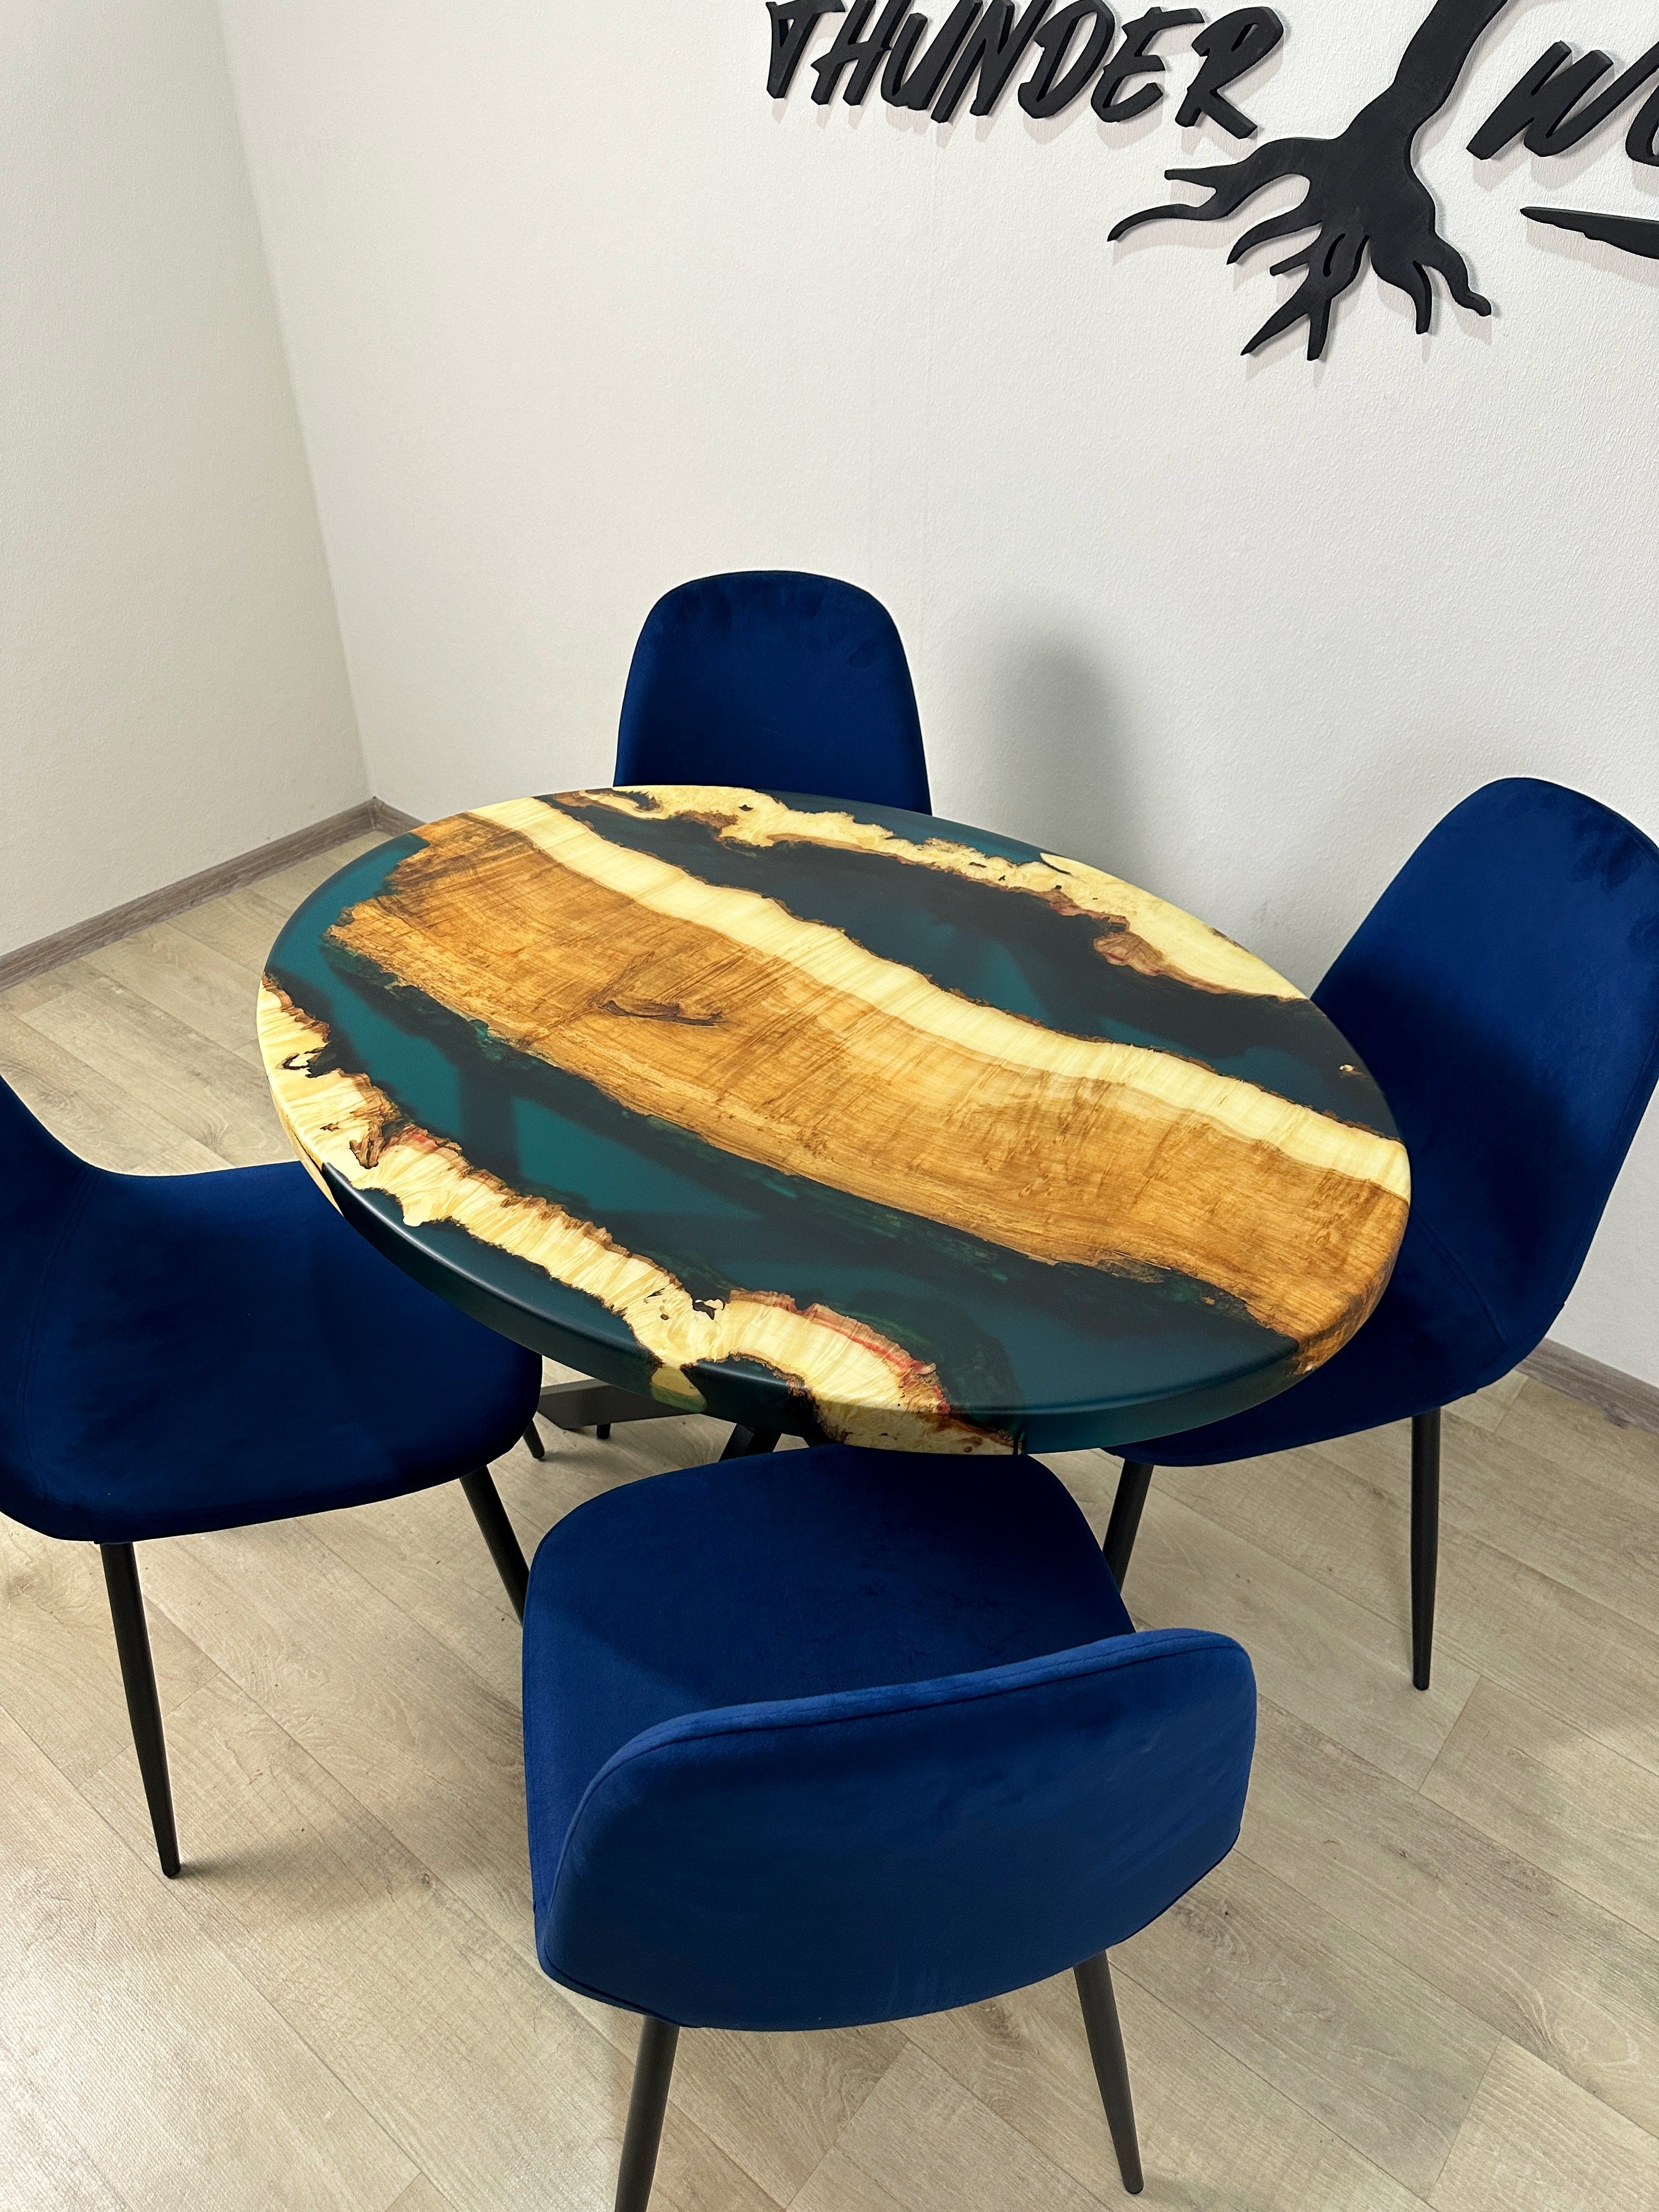 Maldives epoxy resin river dining table , maple wood, islands, turquoise resin  color - Fine Wooden Creations